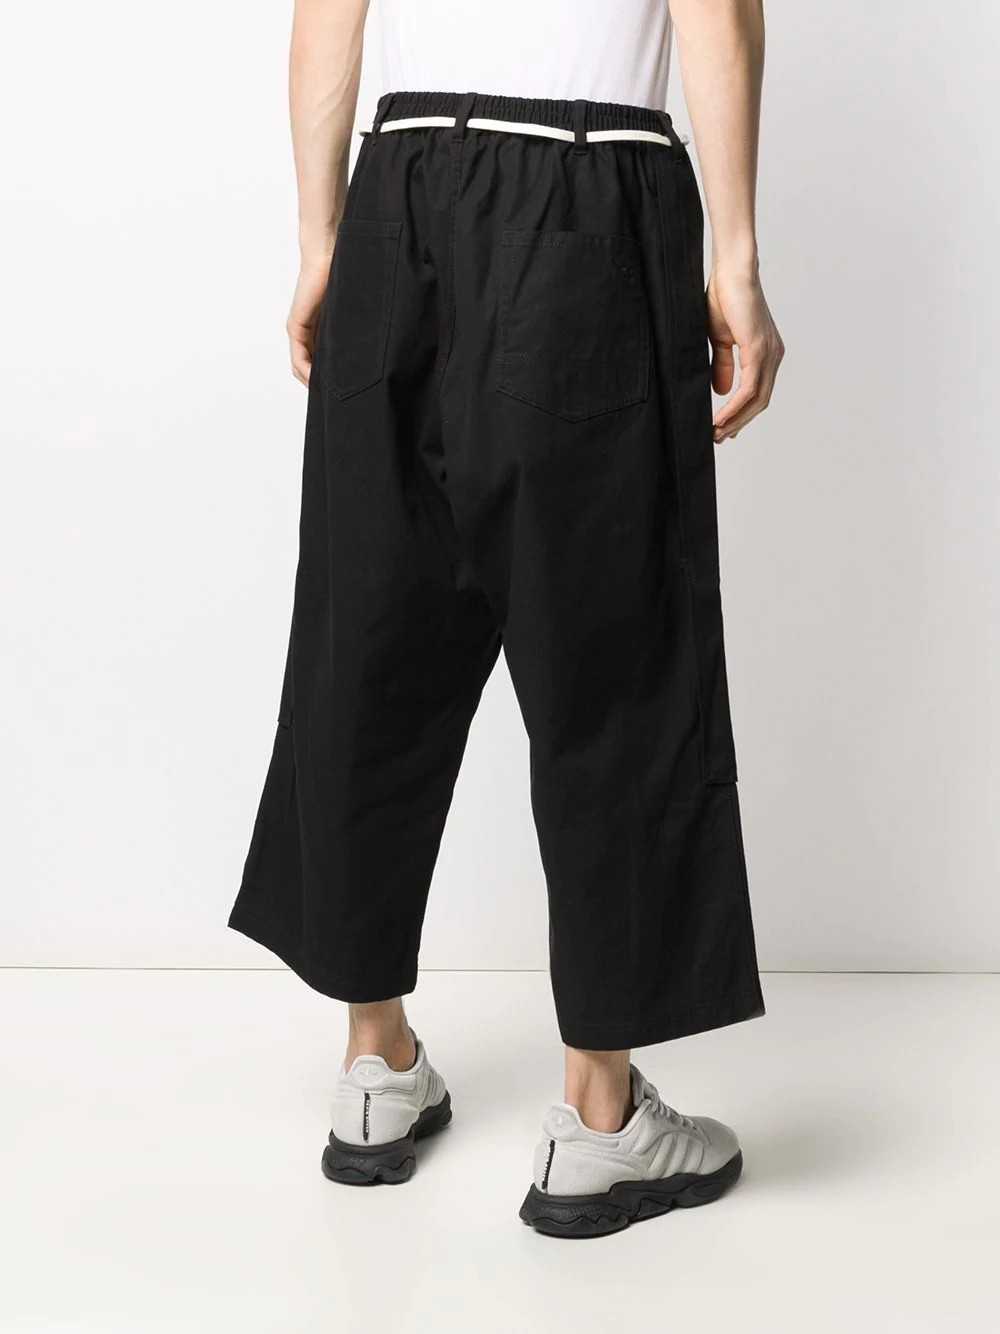 Y-3 Canvas Workwear Cropped Pants FP8678 - image 3